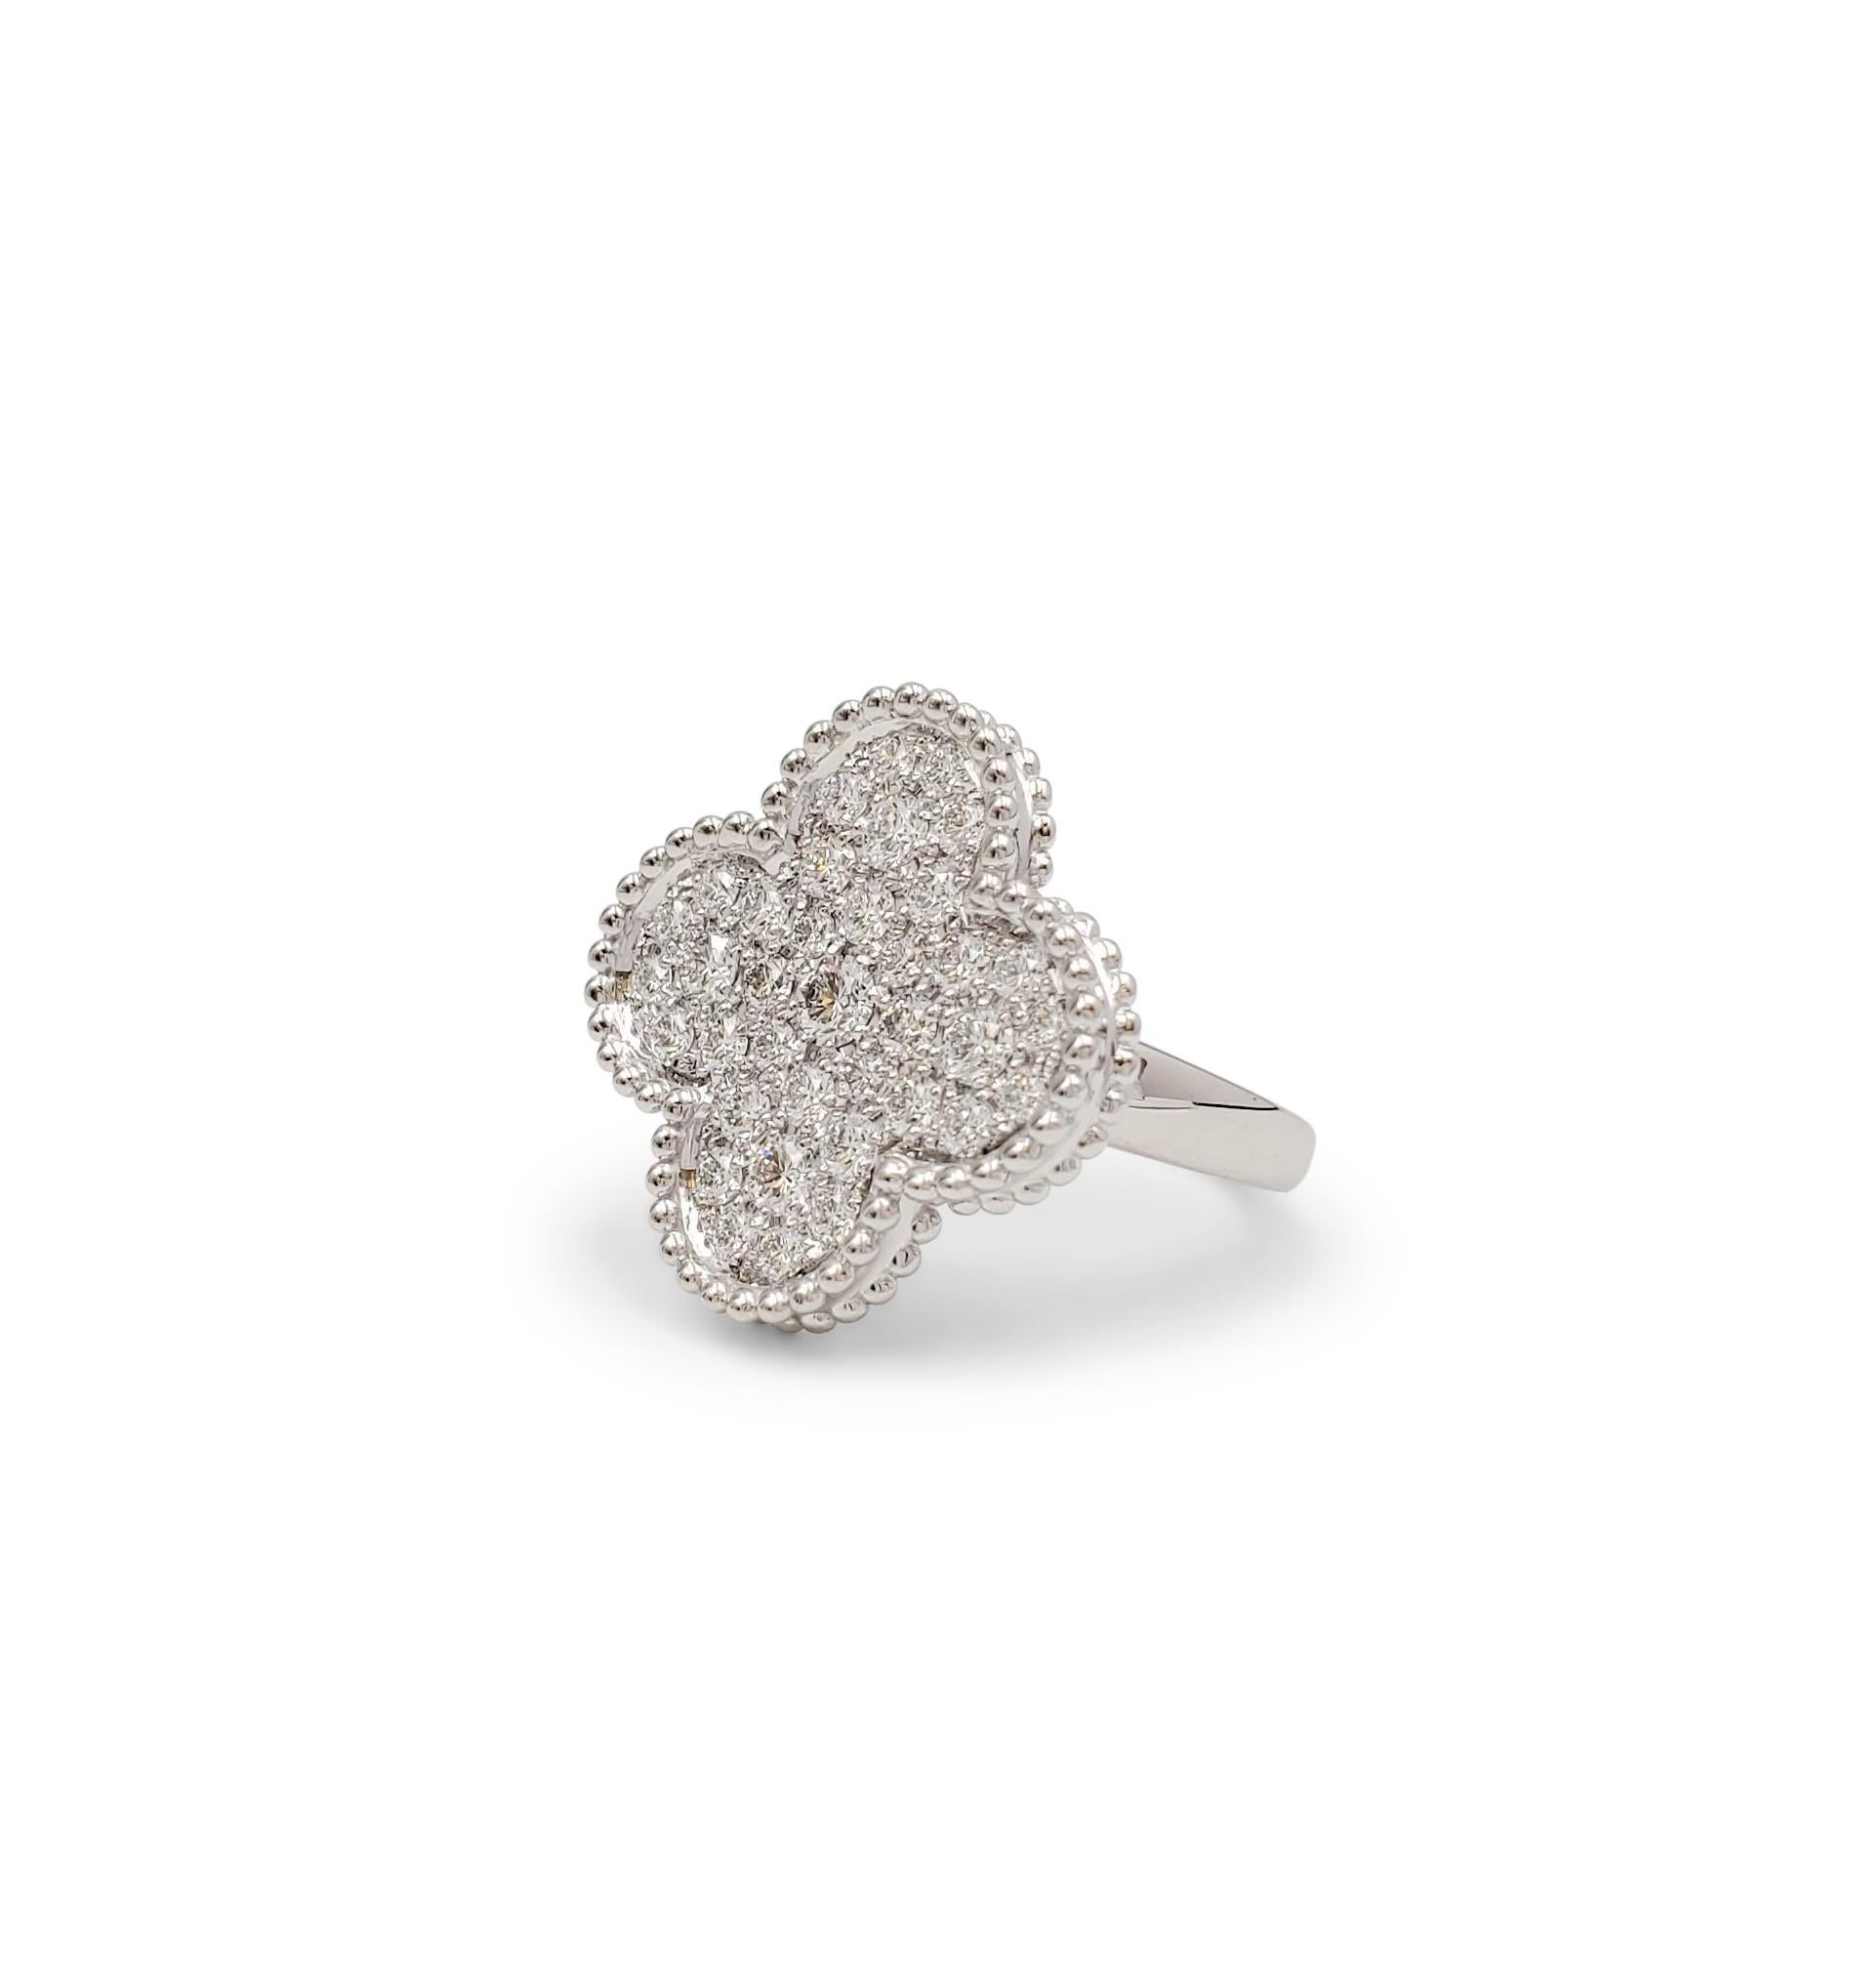 Authentic Van Cleef & Arpels 'Magic Alhambra' ring crafted in 18 karat white gold centering on a cover motif set with an estimated 1.07 carats of round brilliant cut diamonds (E-F, VS). Signed VCA, Au750, 50, with serial number. The ring is